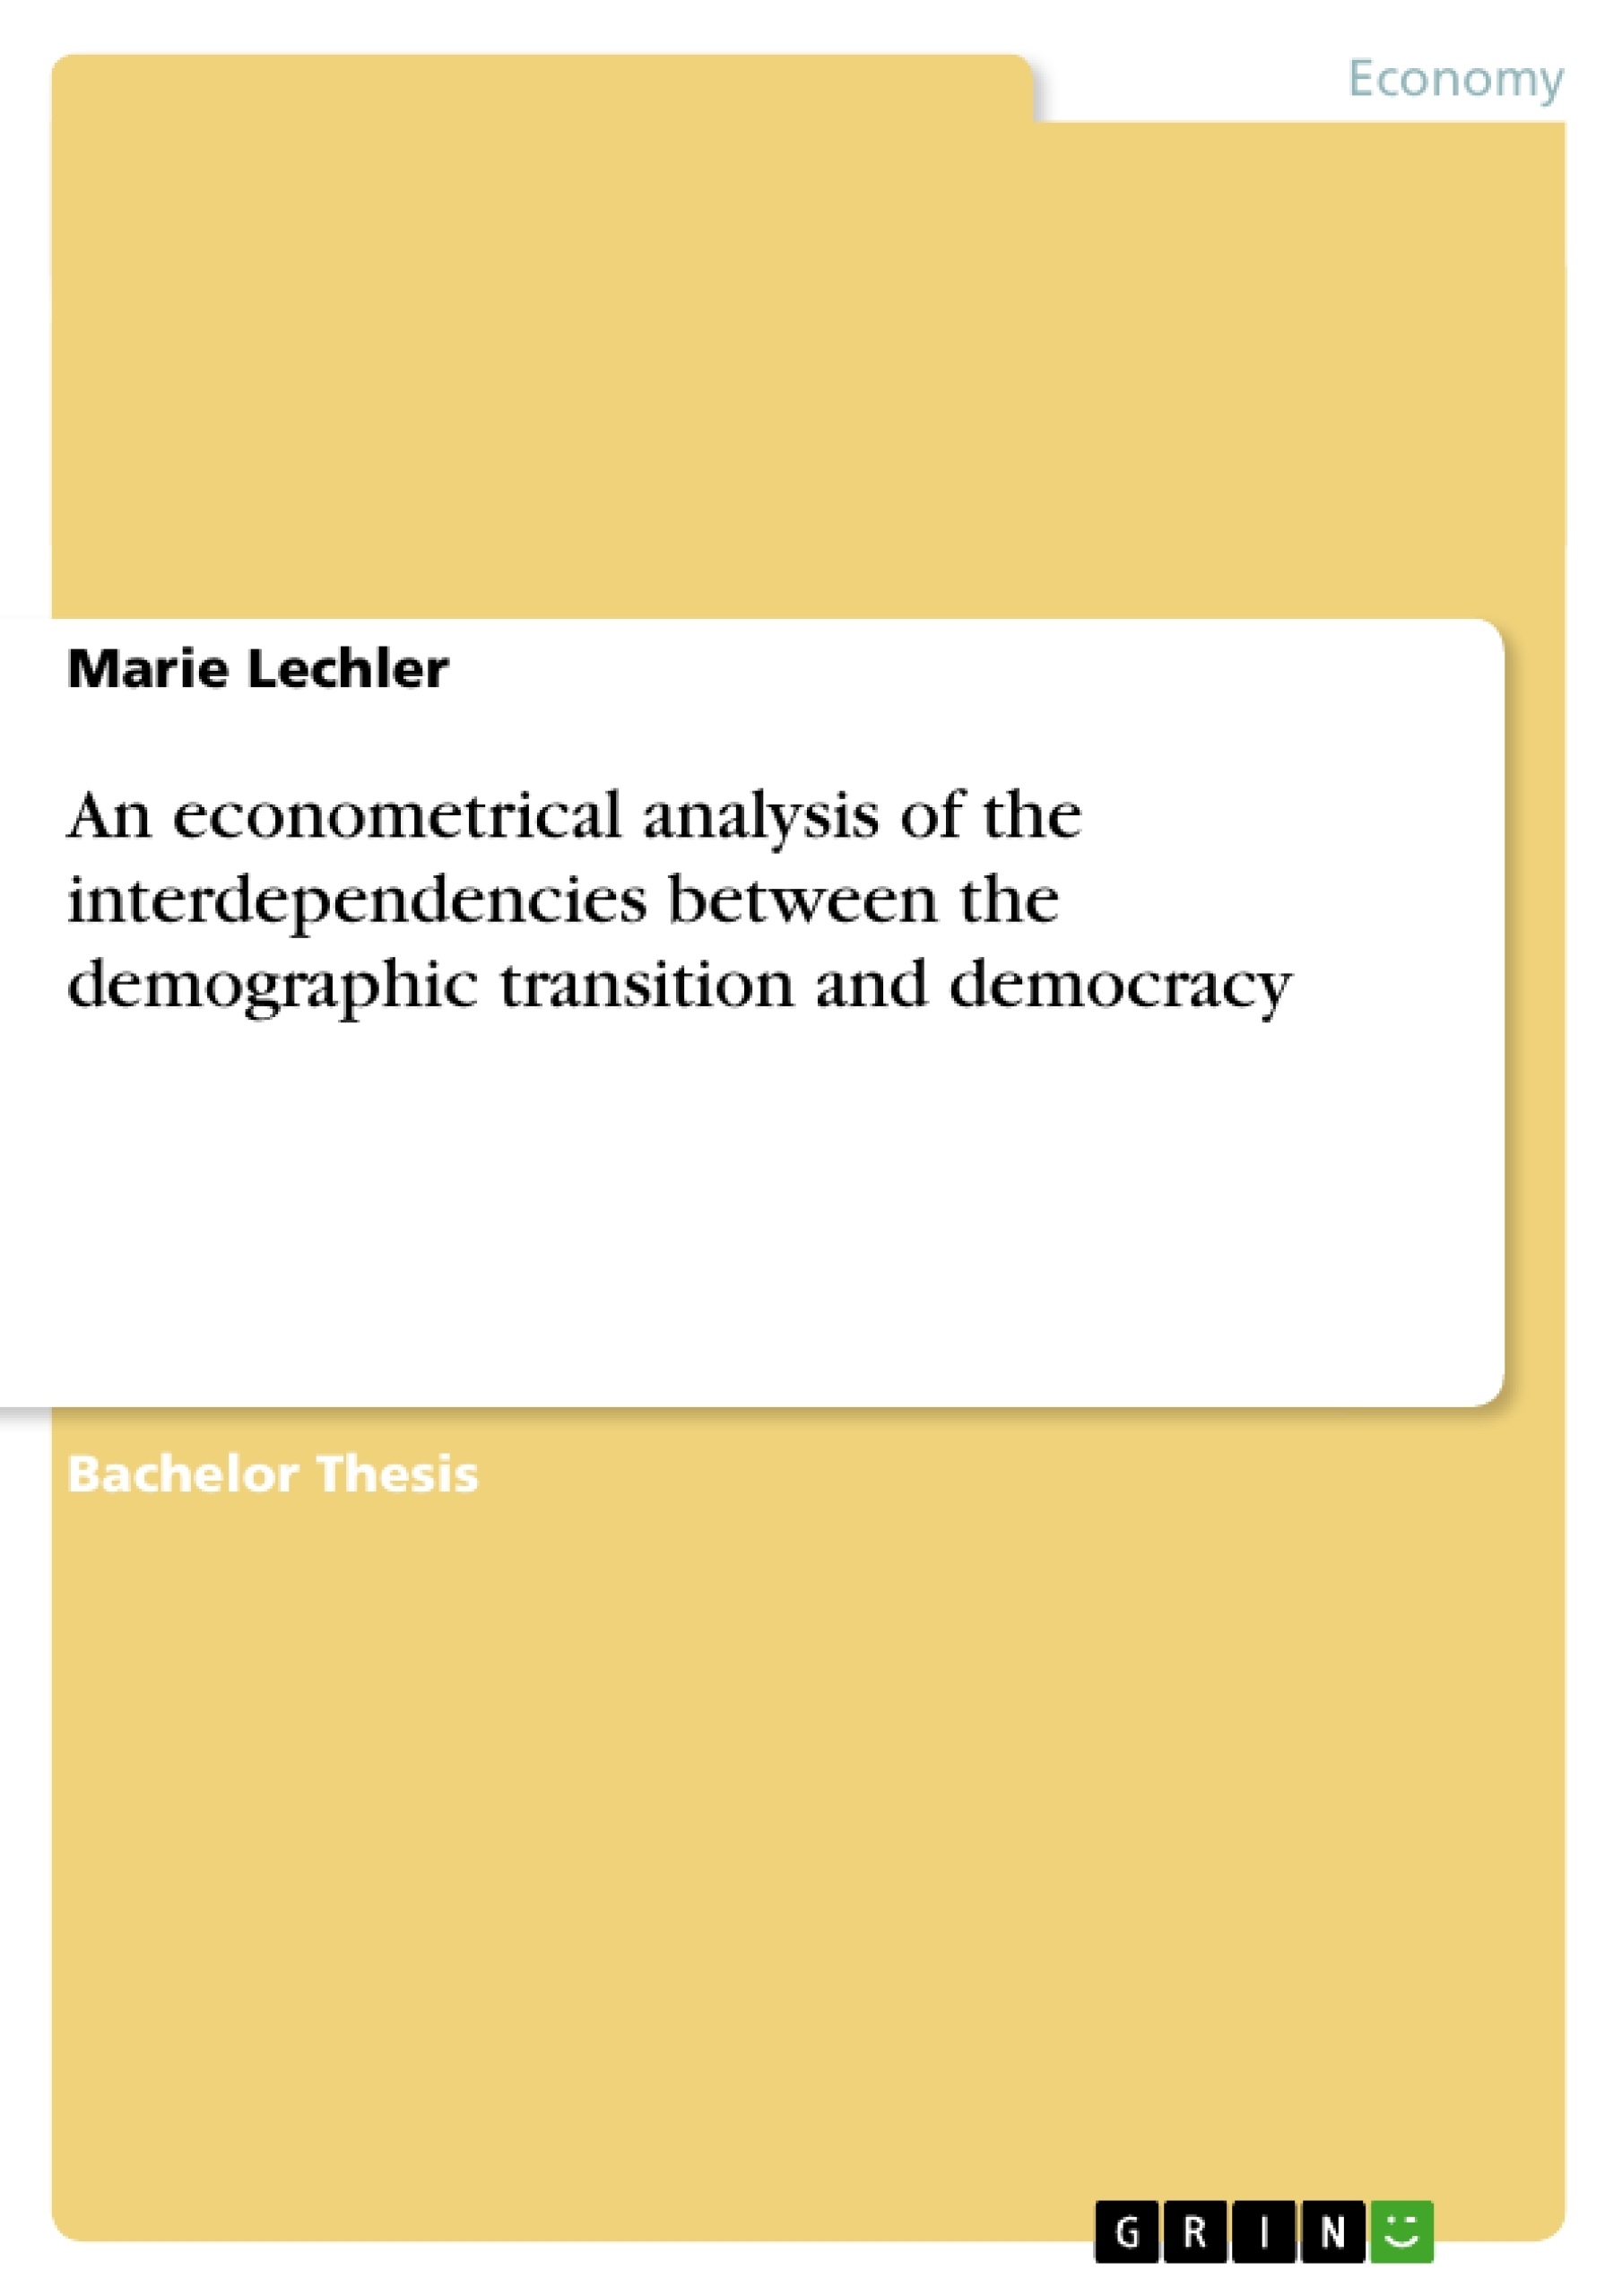 Title: An econometrical analysis of the interdependencies between the demographic transition and democracy